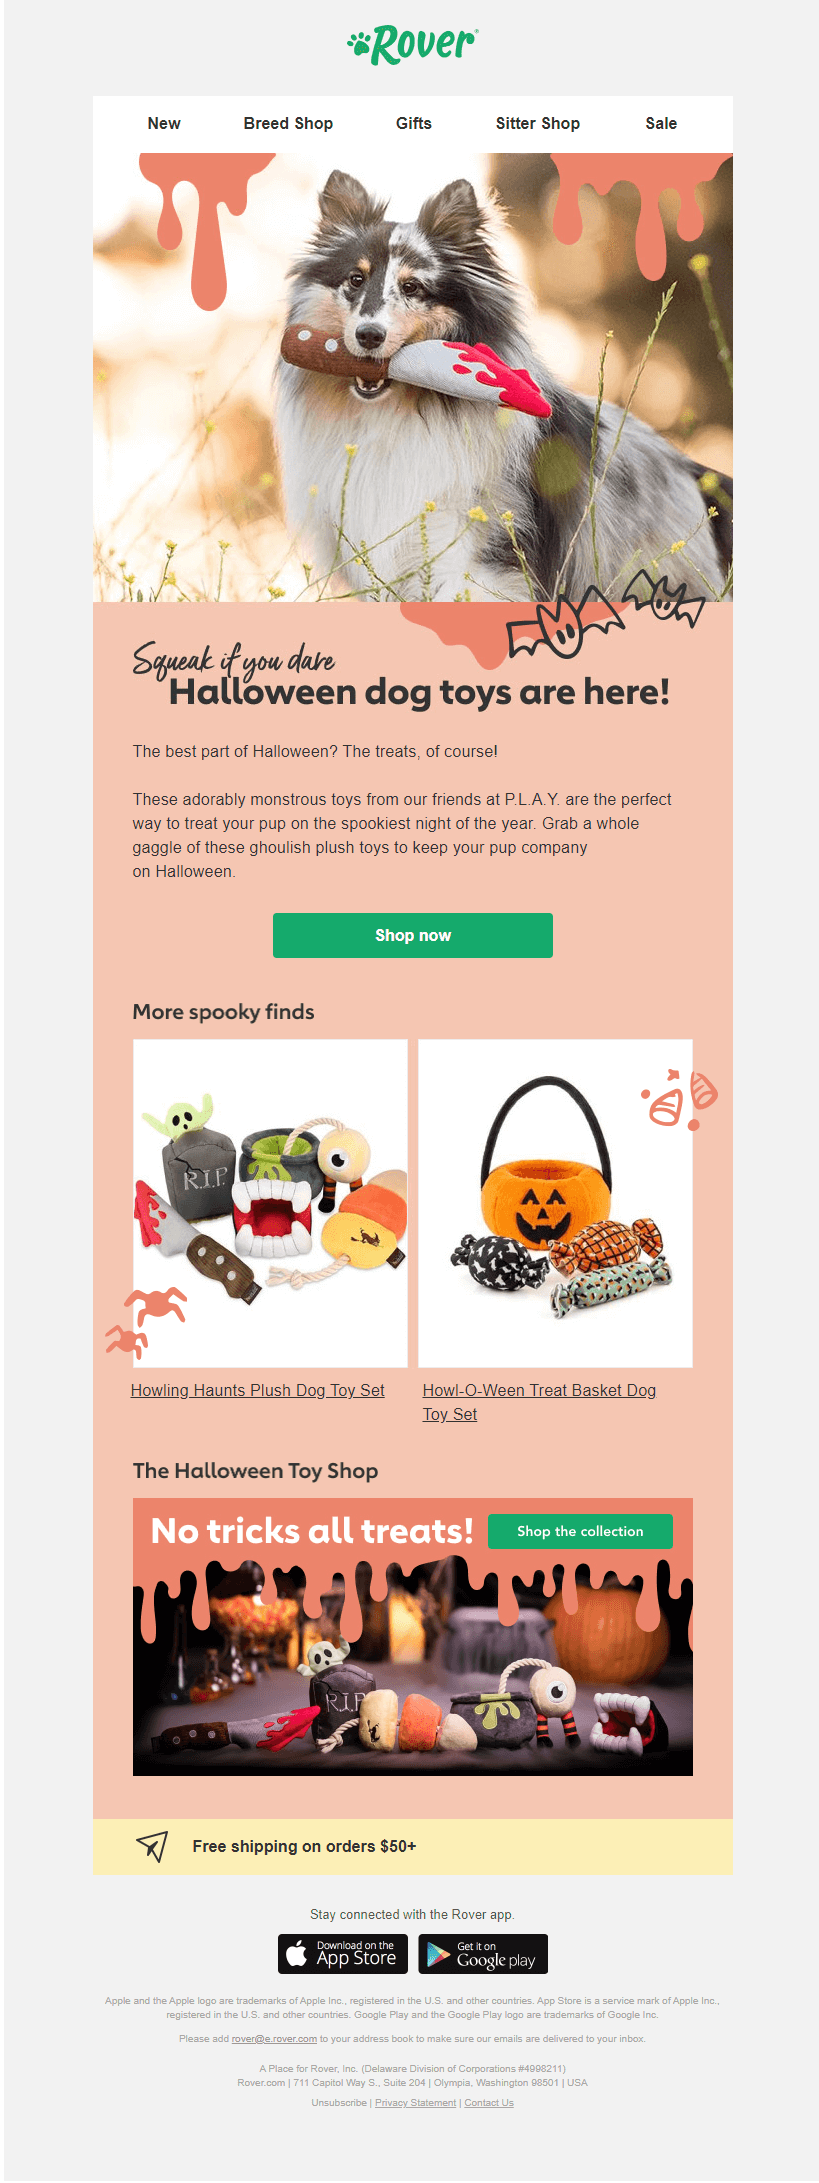 Rover Halloween email